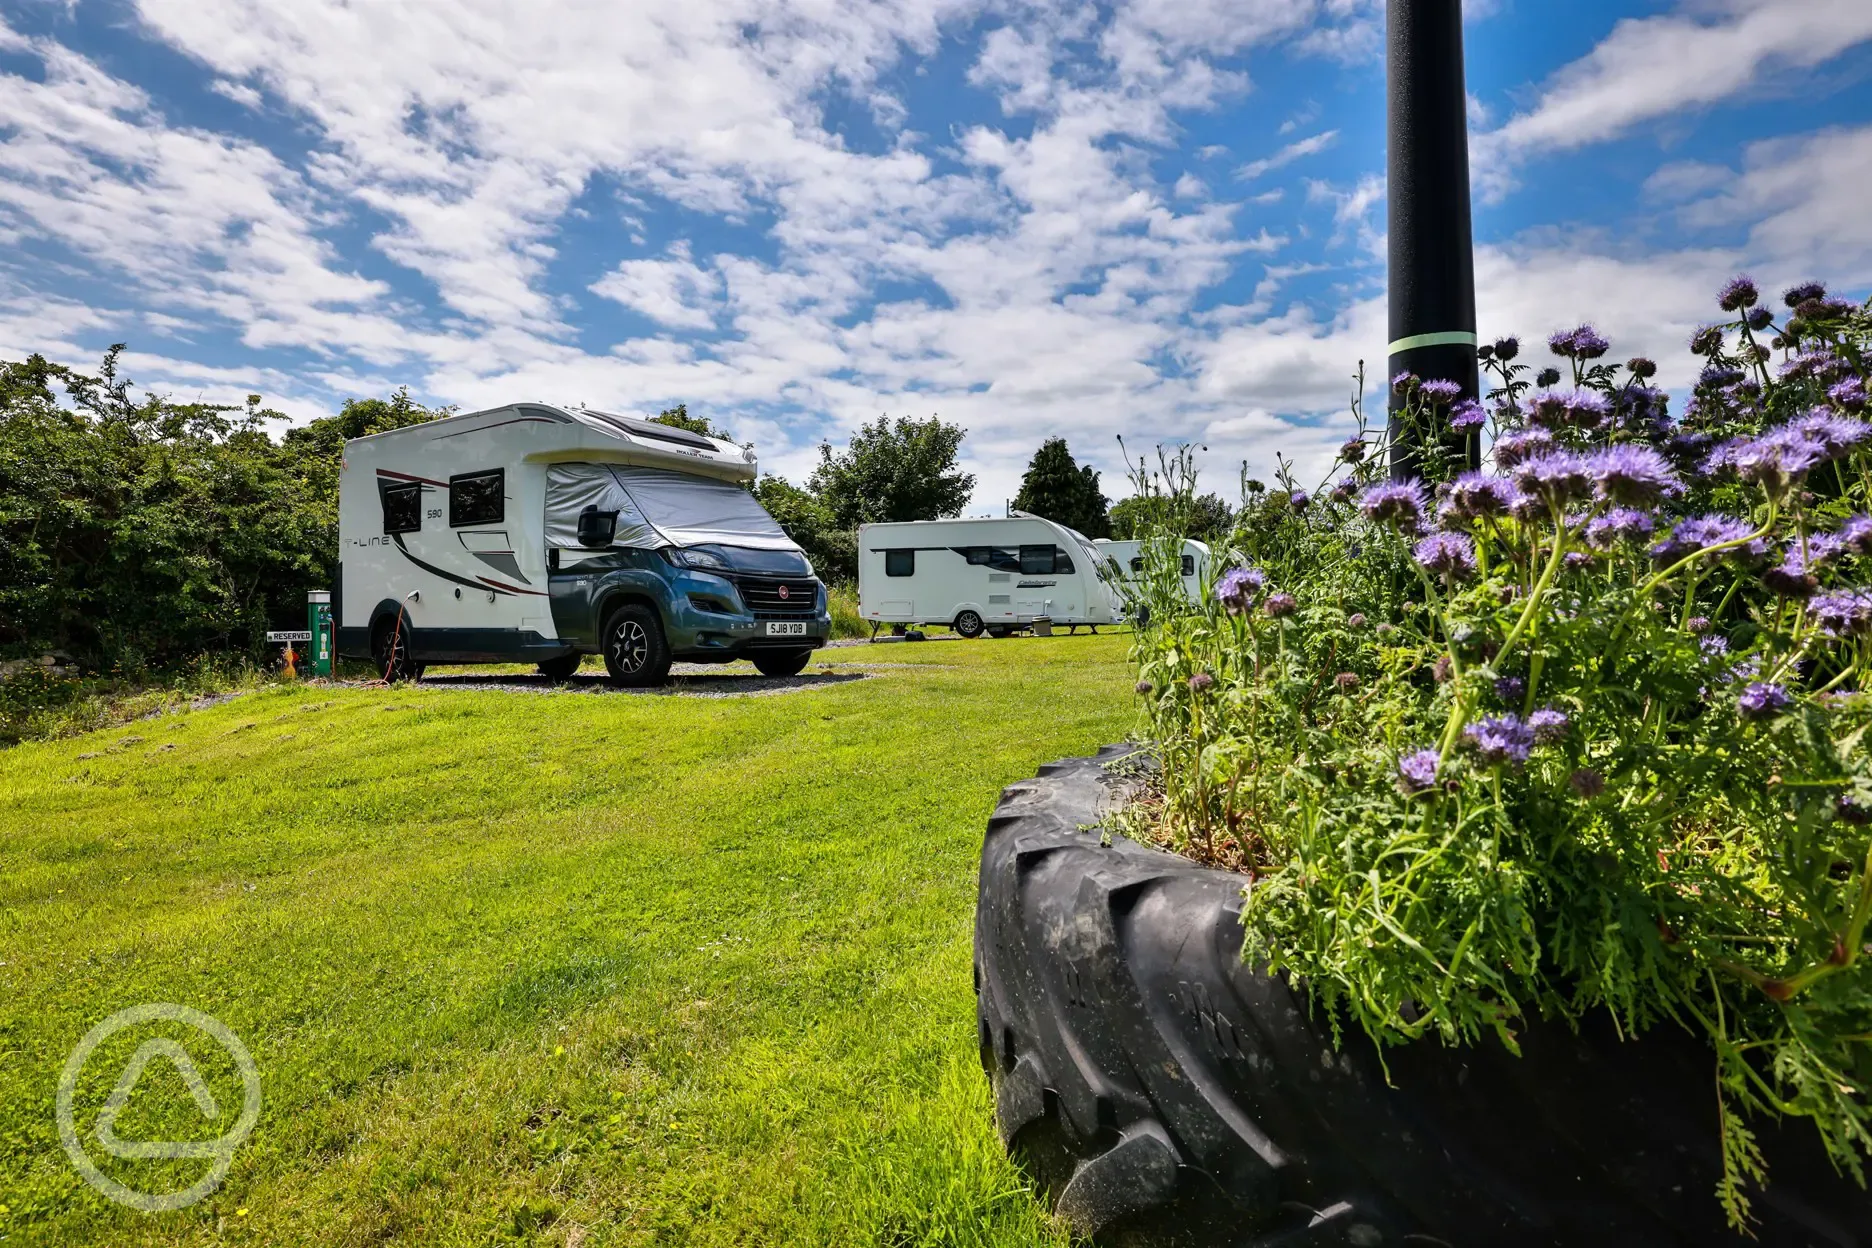 Fully serviced hardstanding and grass pitches